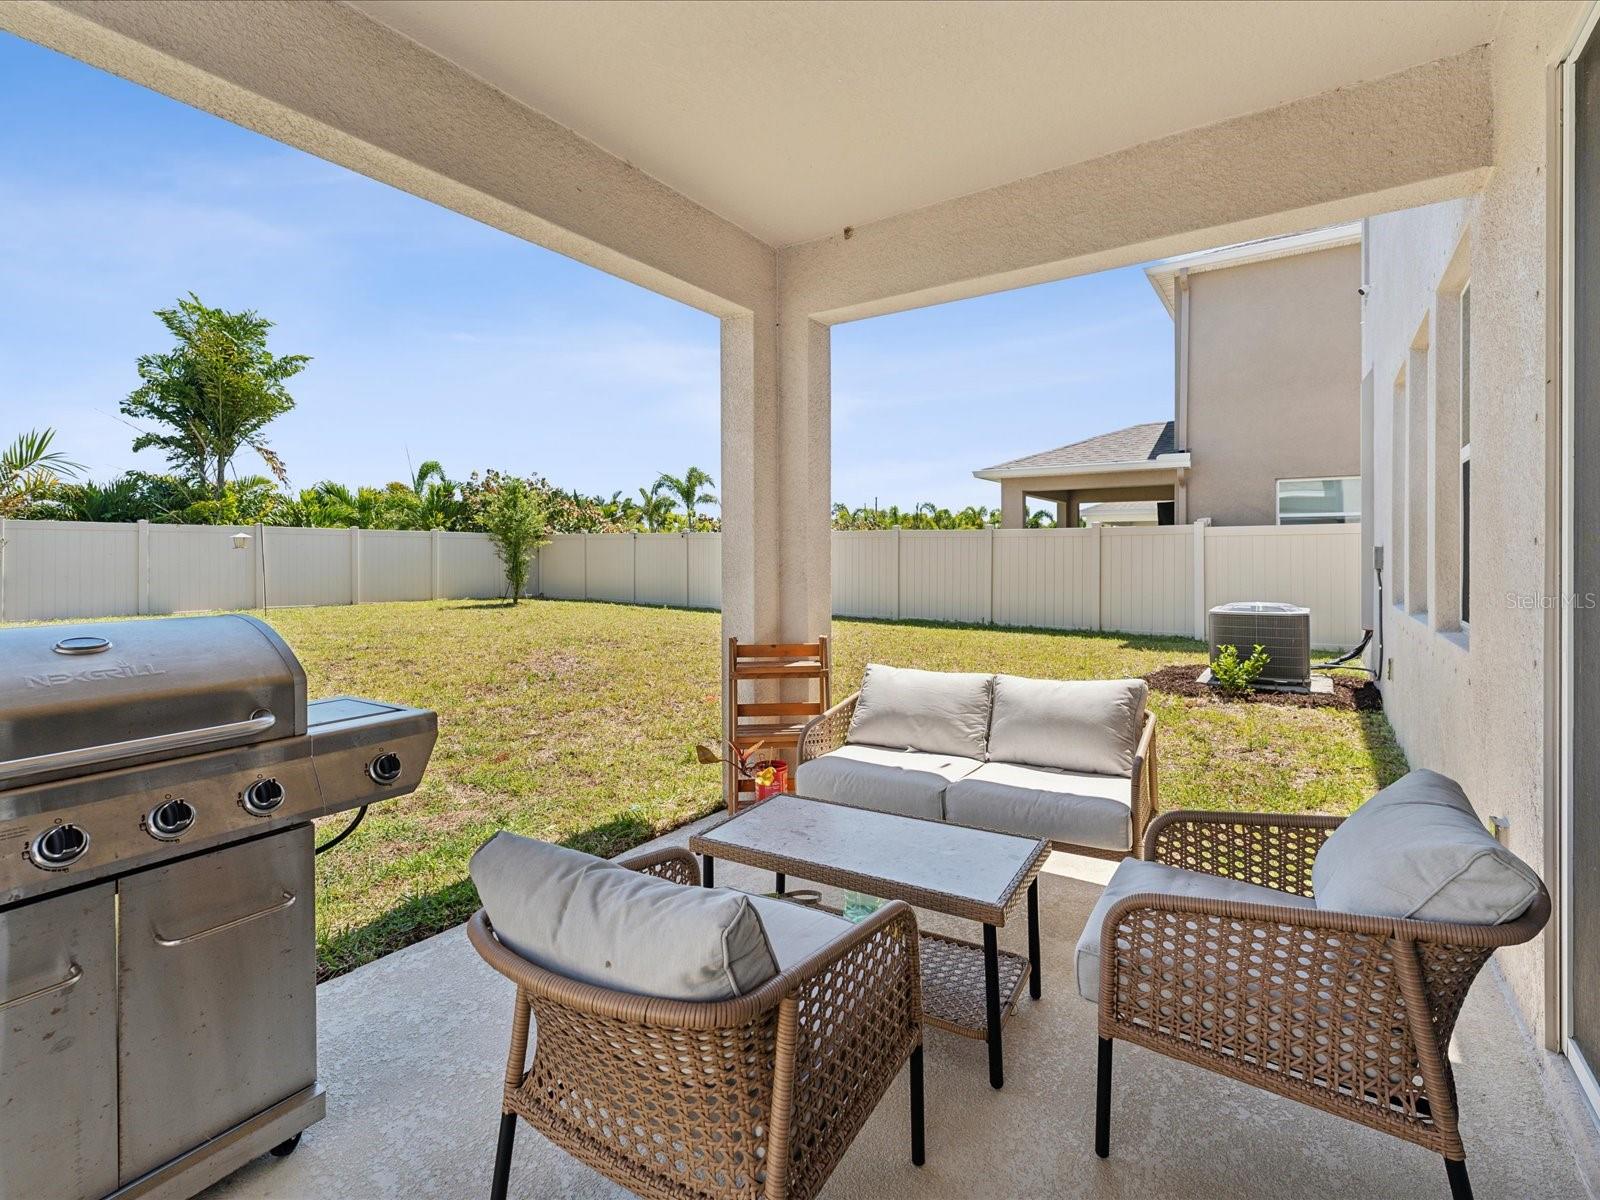 Enjoy grilling and relaxing on your lanai.